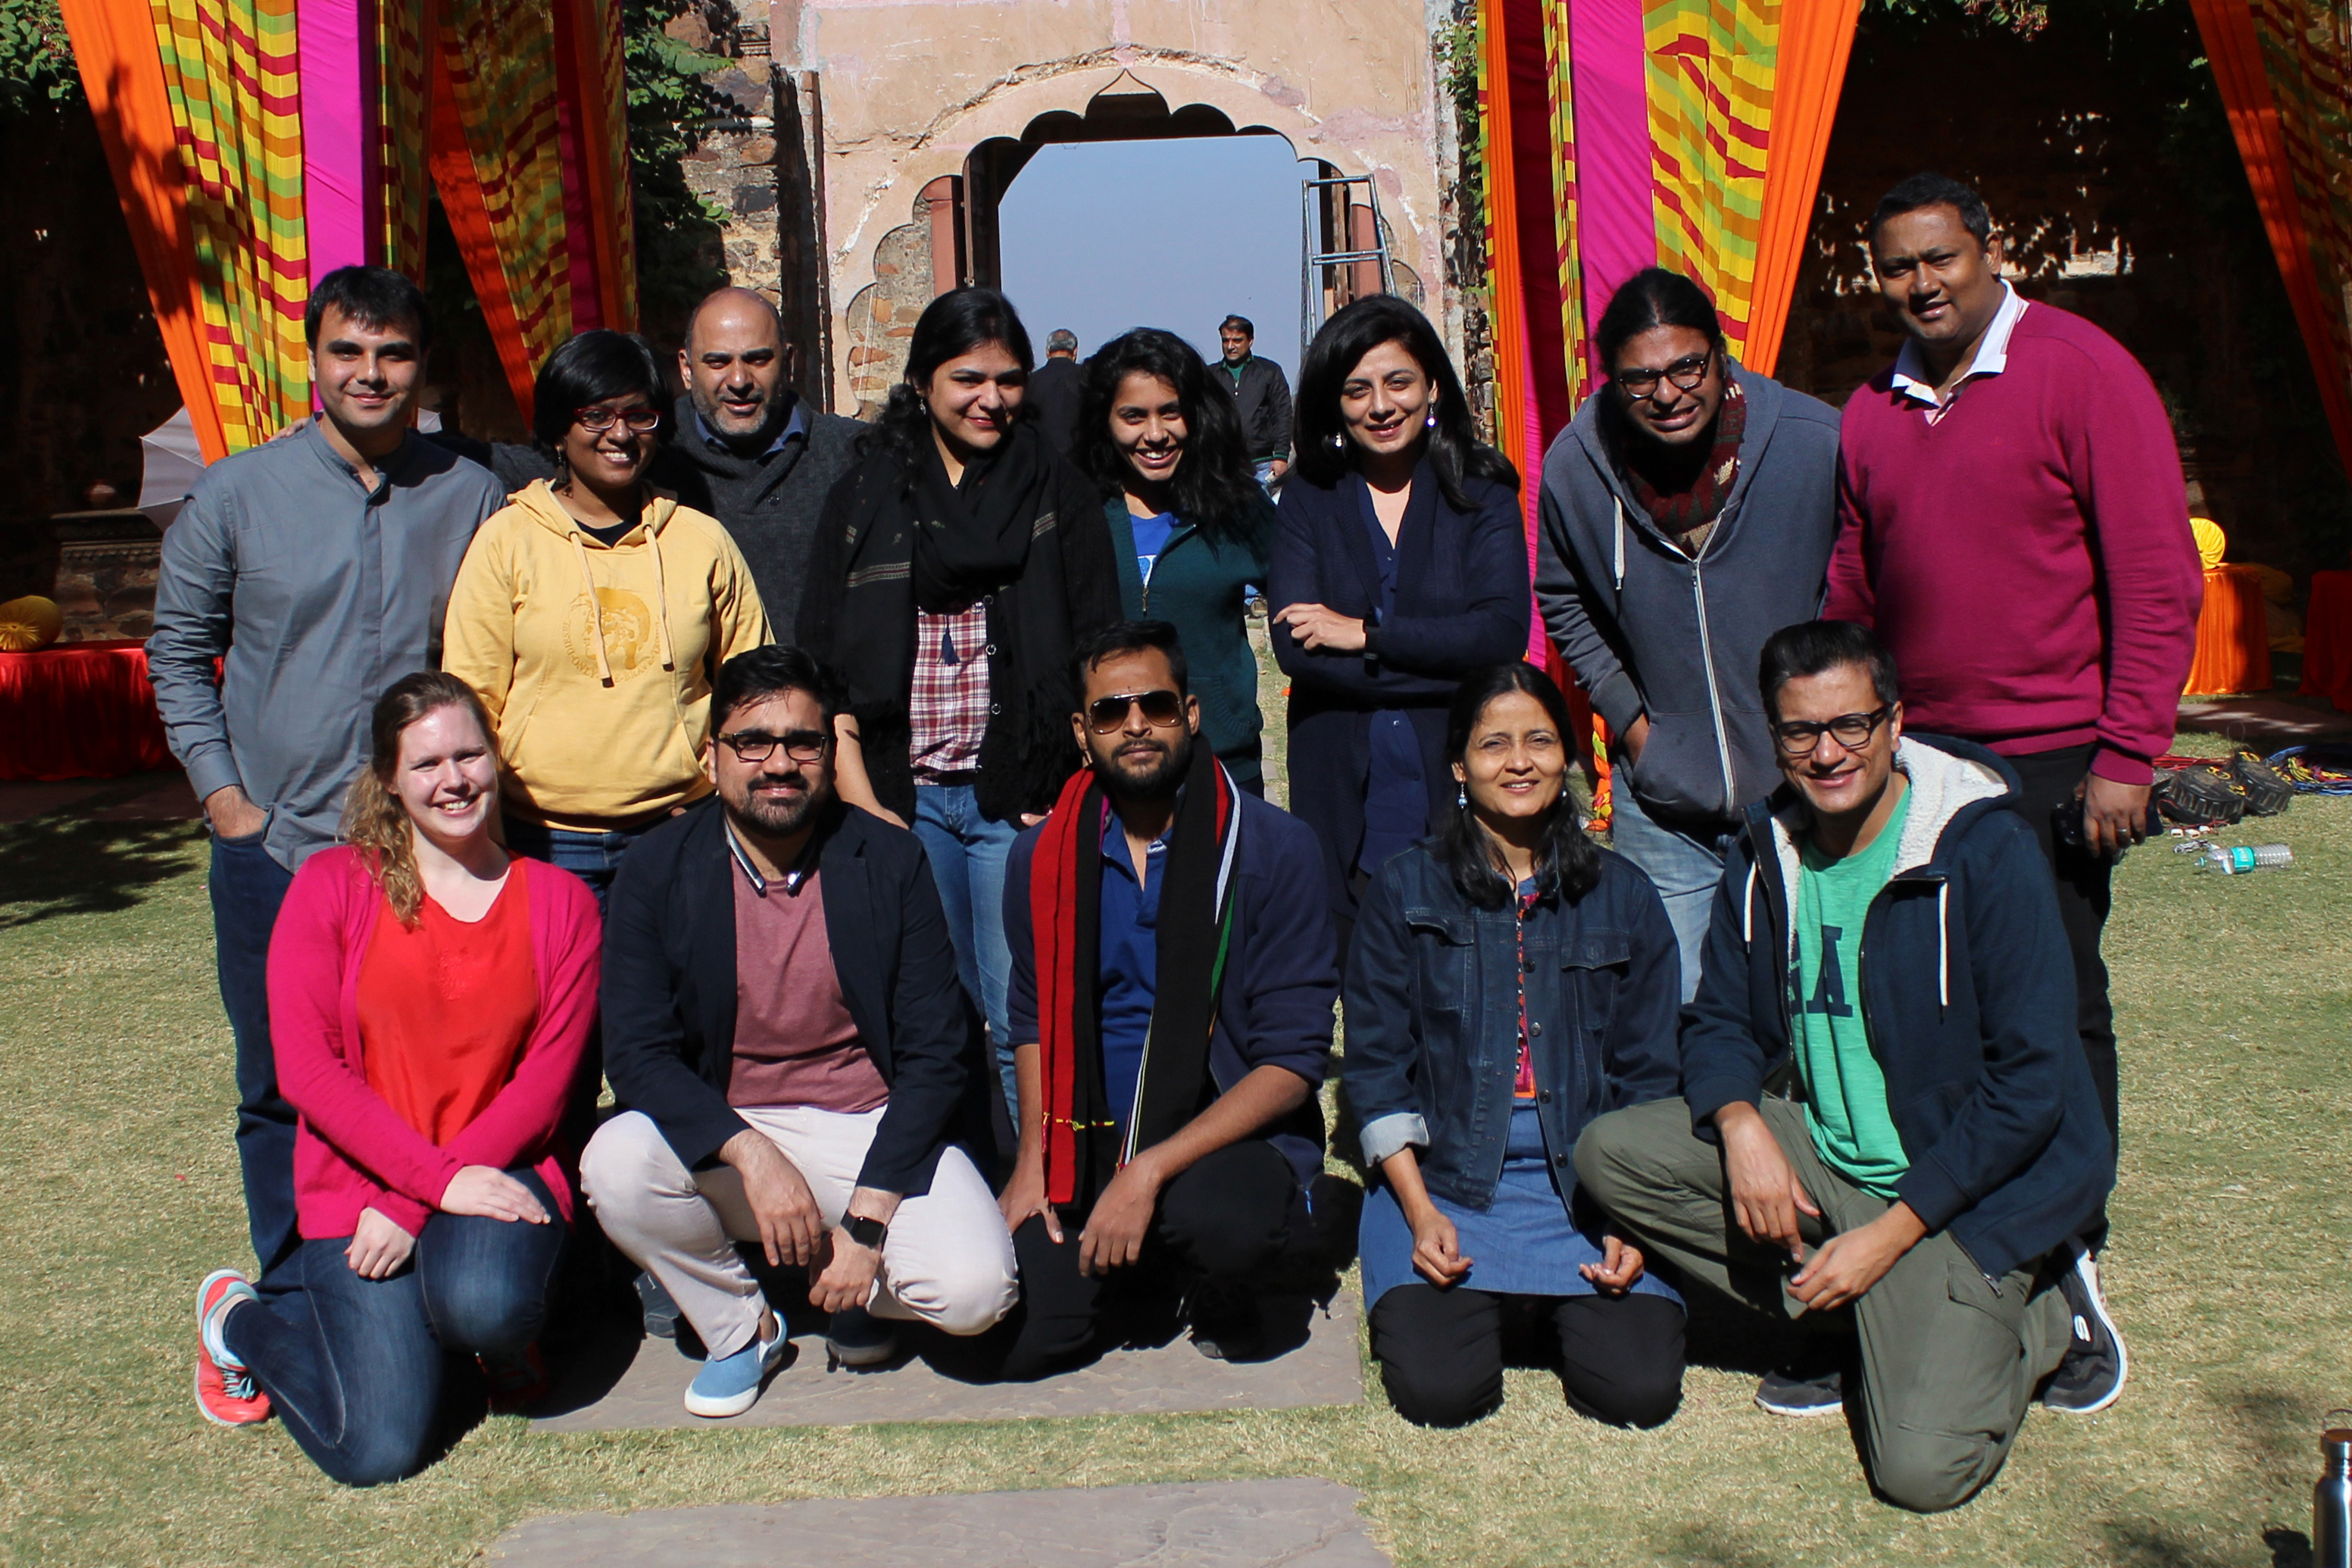 Current and former ICFJ Knight Fellows and associates from India